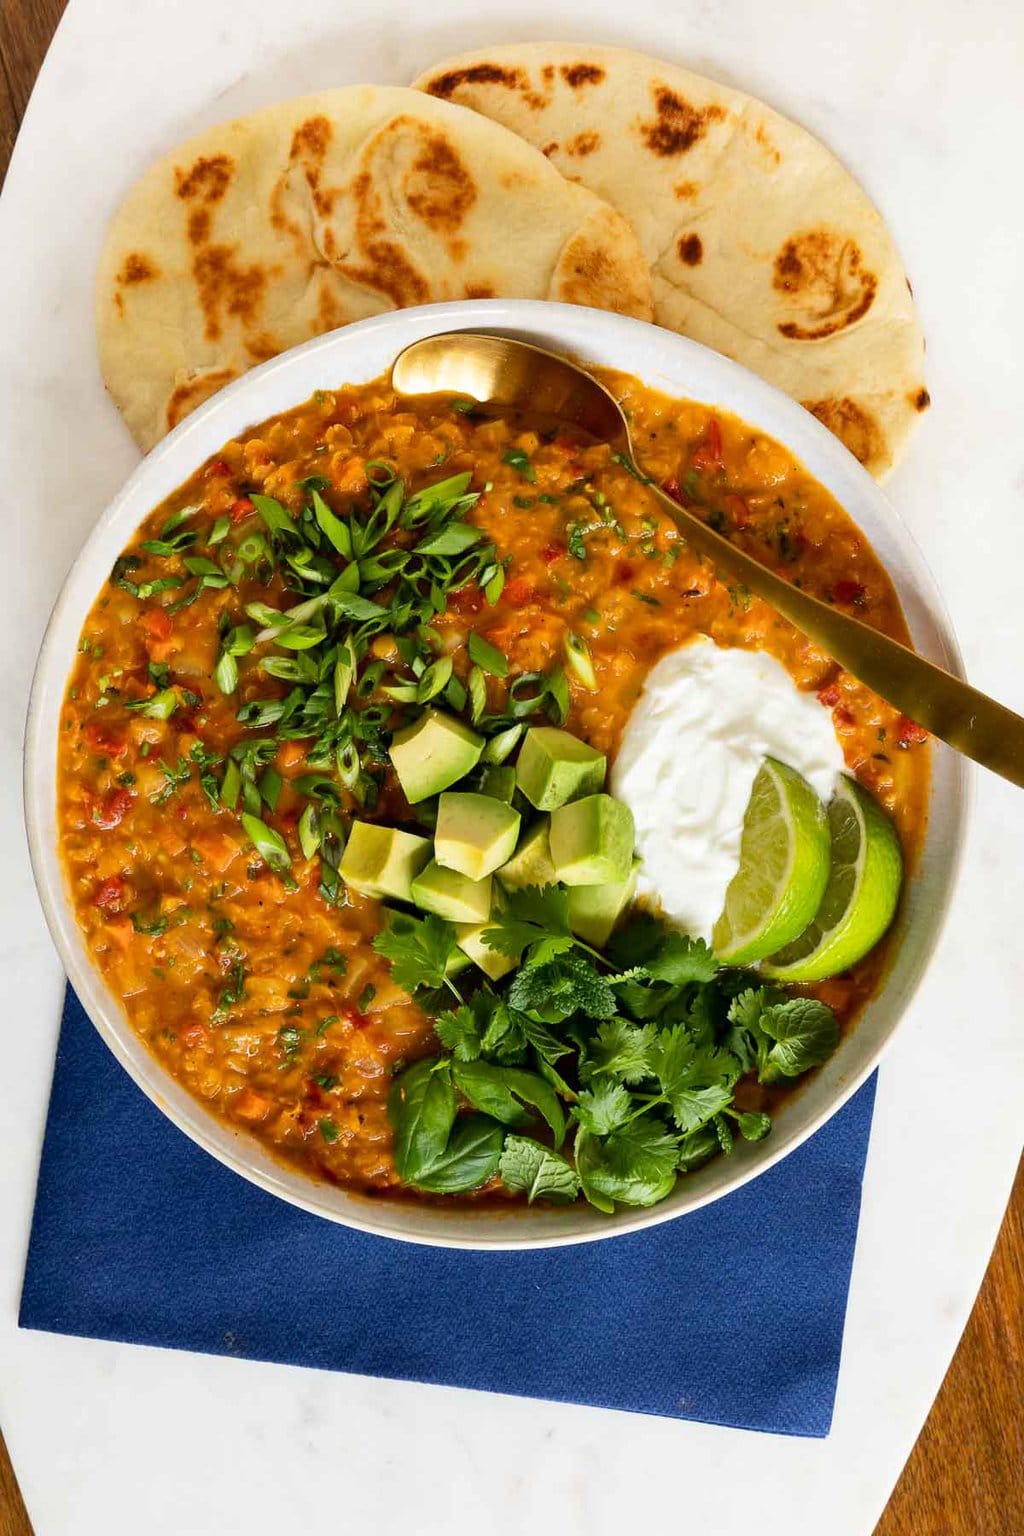 Vertical overhead photo of a serving bowl of Curried Red Lentil Coconut Soup with fresh baked naan bread on the side.